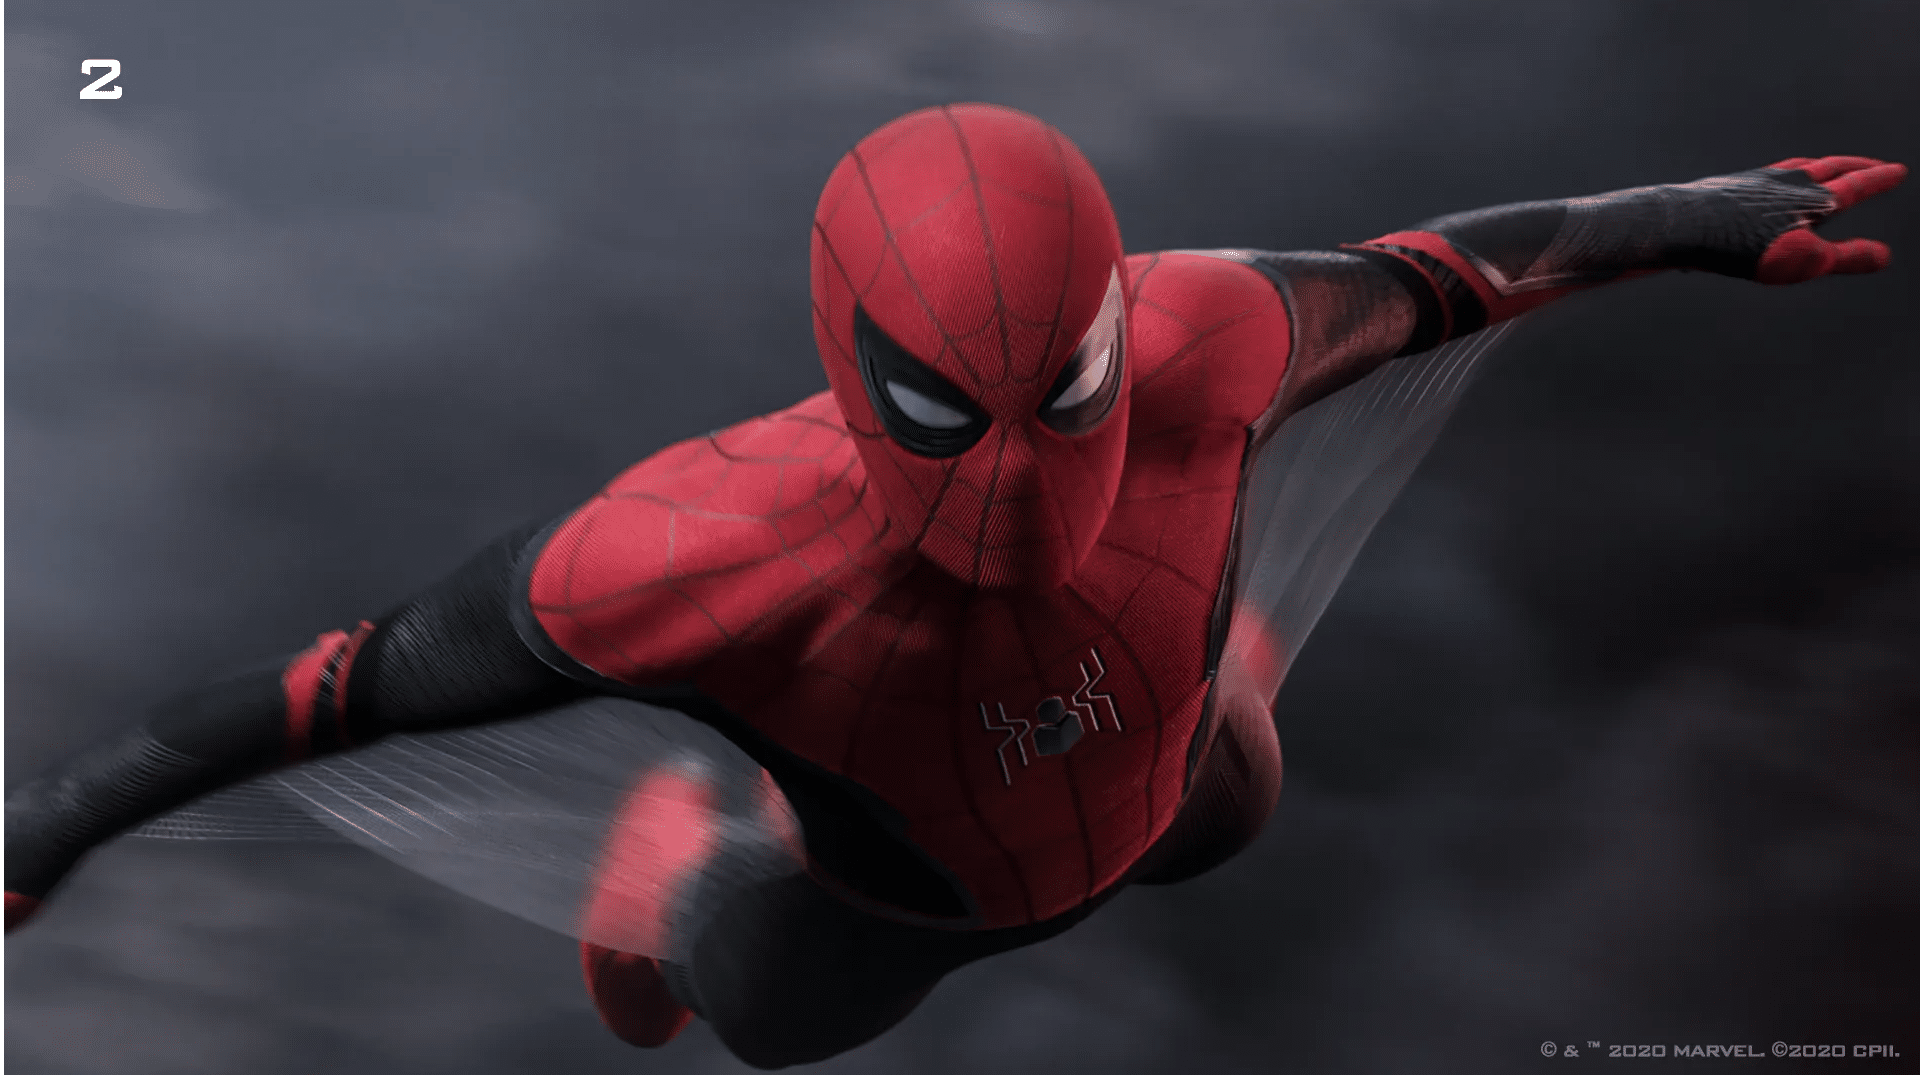 Does Spider-Man No Way Home mark the ending of the Homecoming franchise?